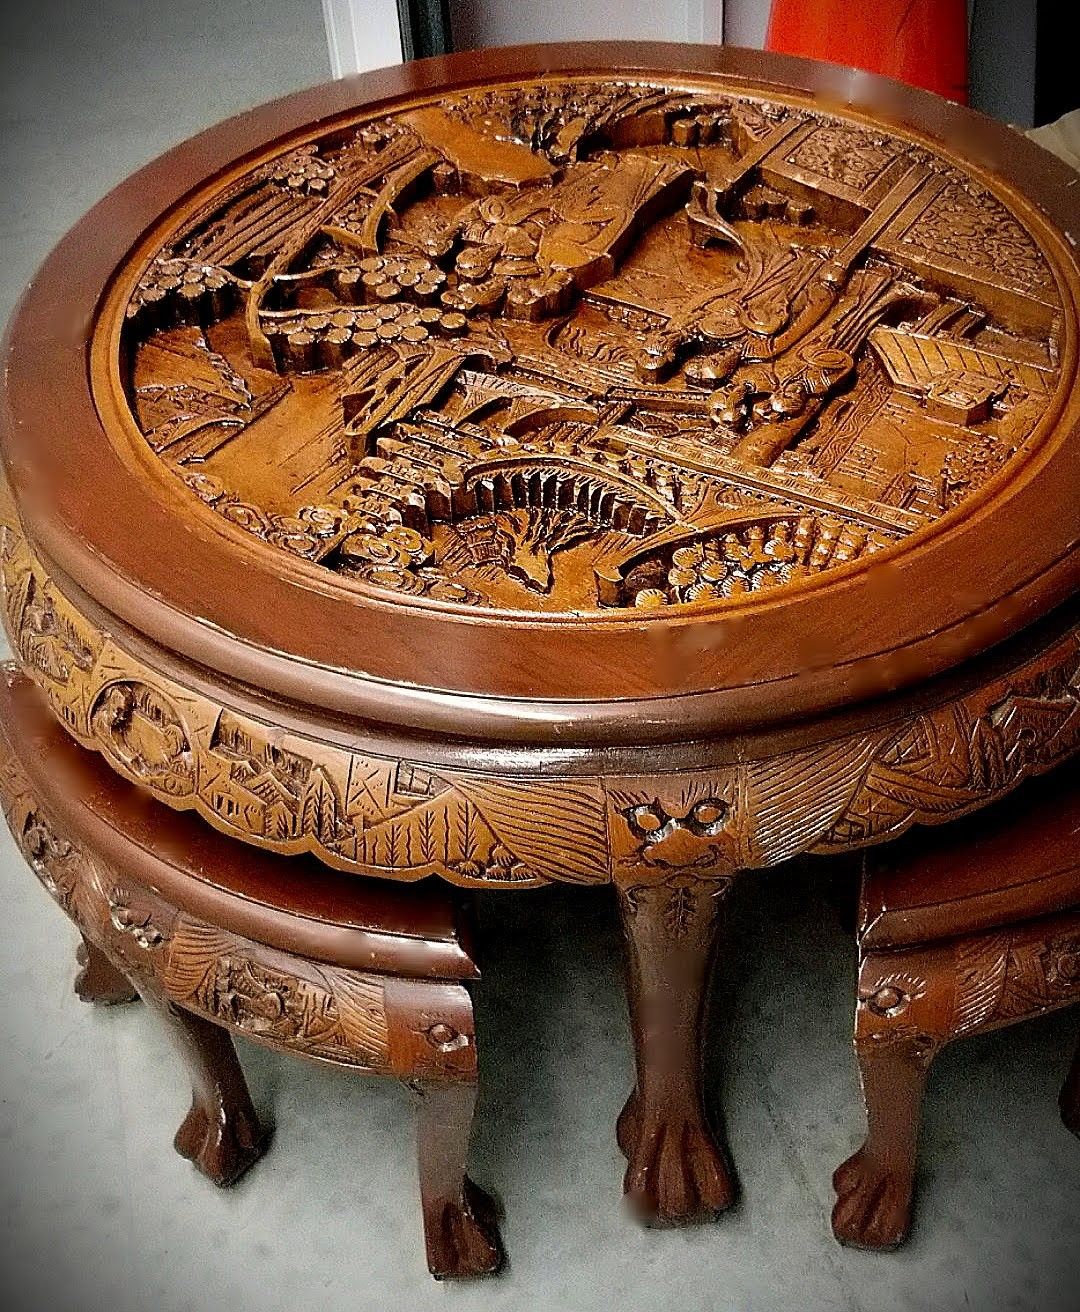 Handcarved wooden chinese tea table